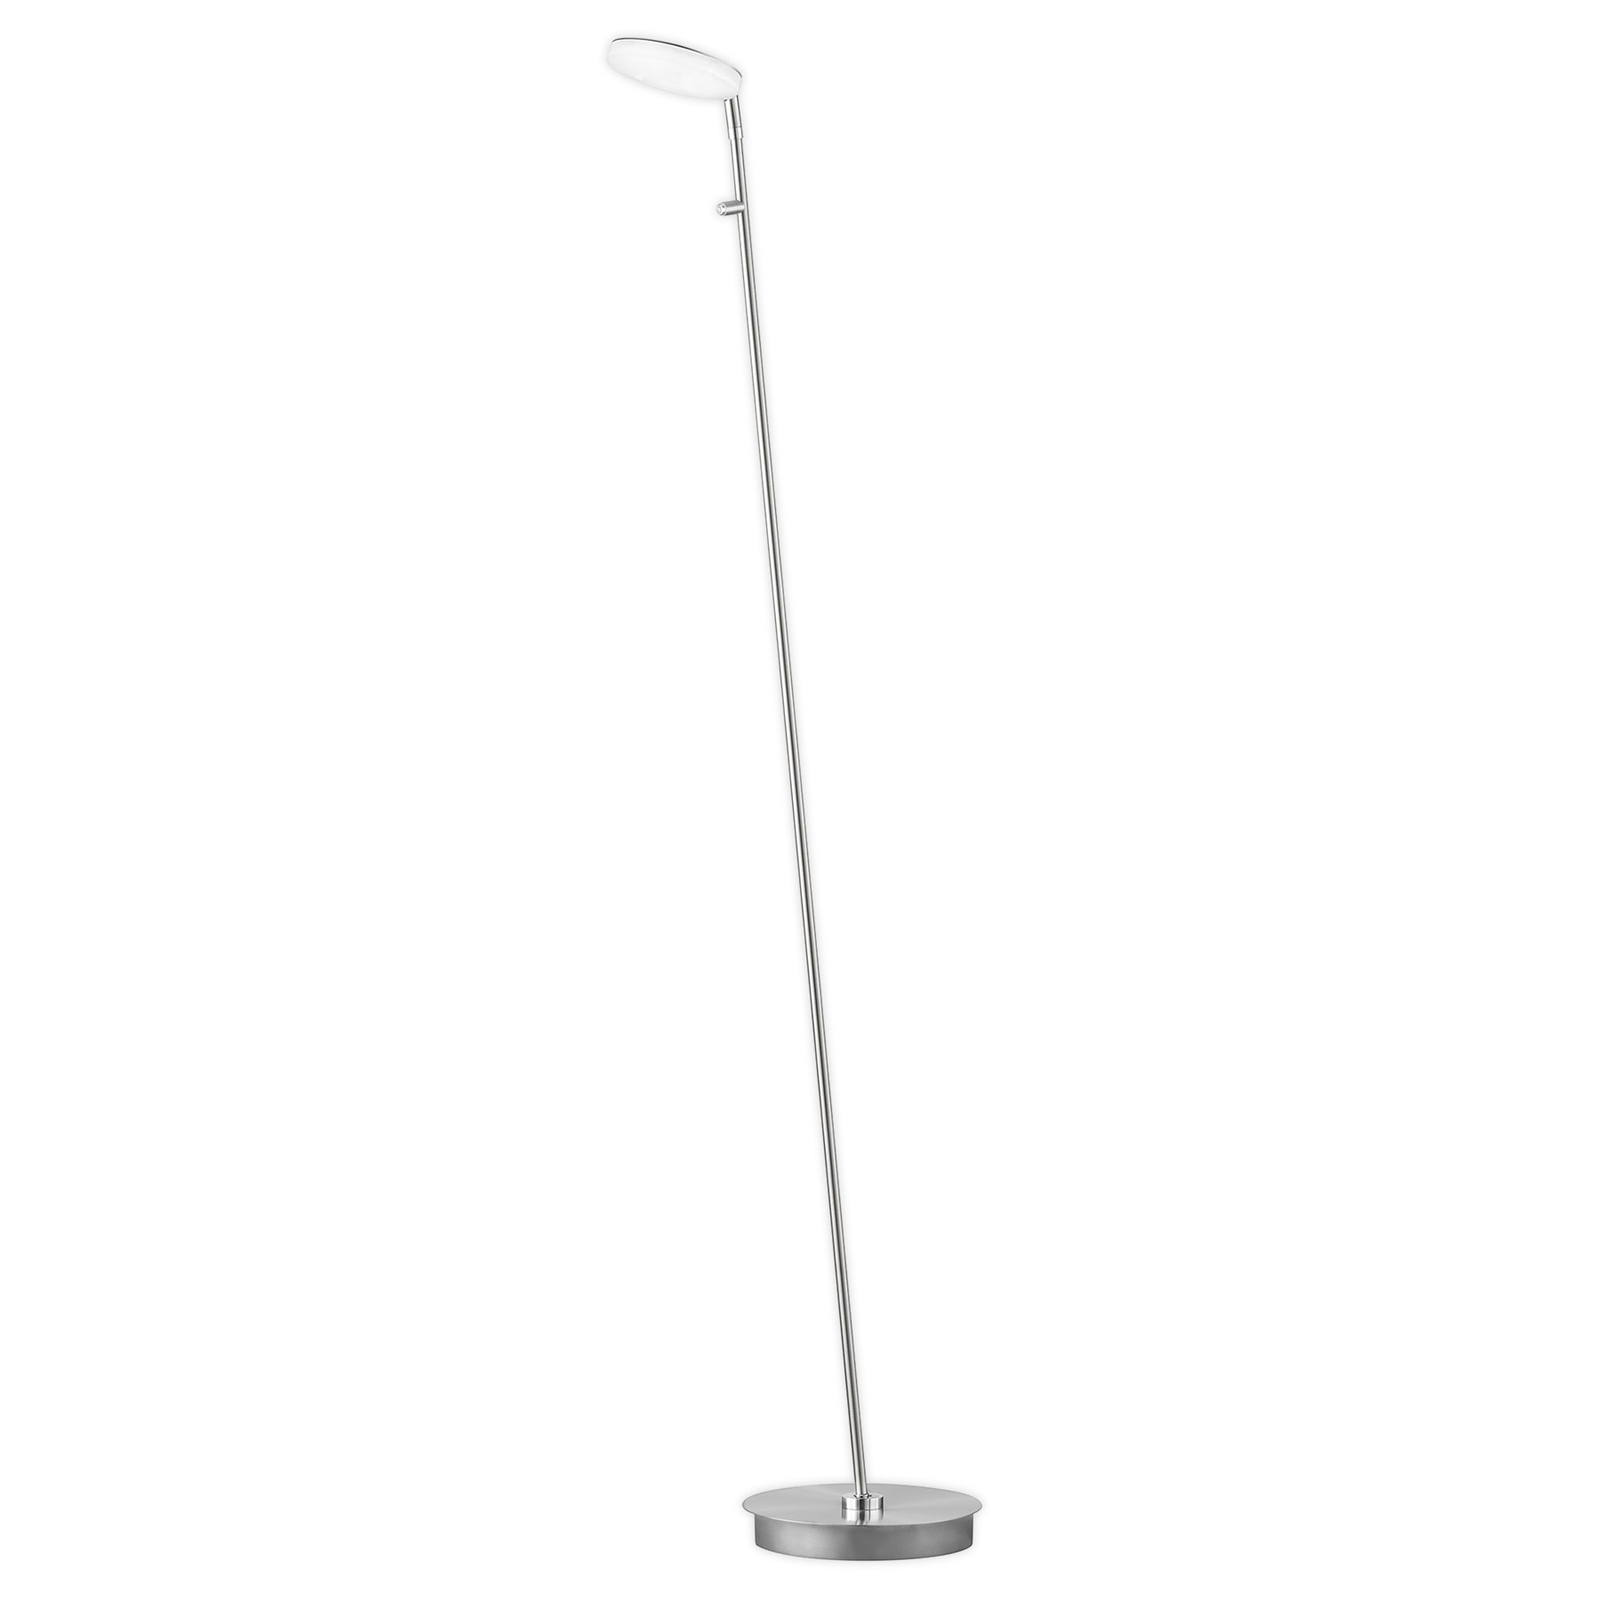 Lampadaire LED Dent, dimmable, CCT, 1 x 8W nickel